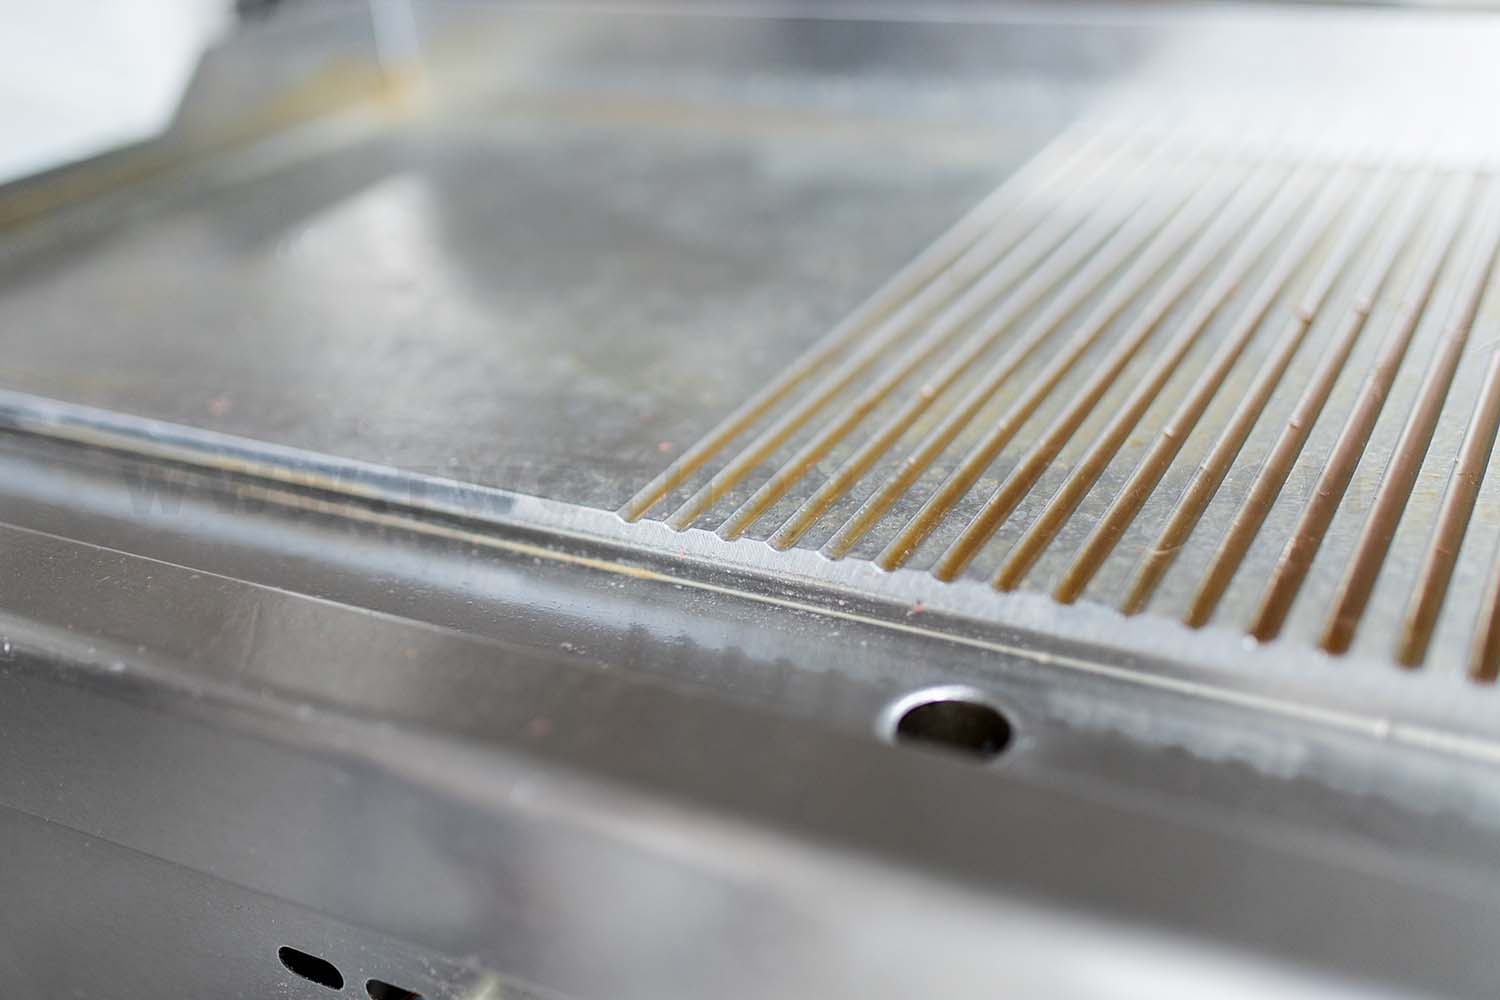 The Panel of Gas Griddle